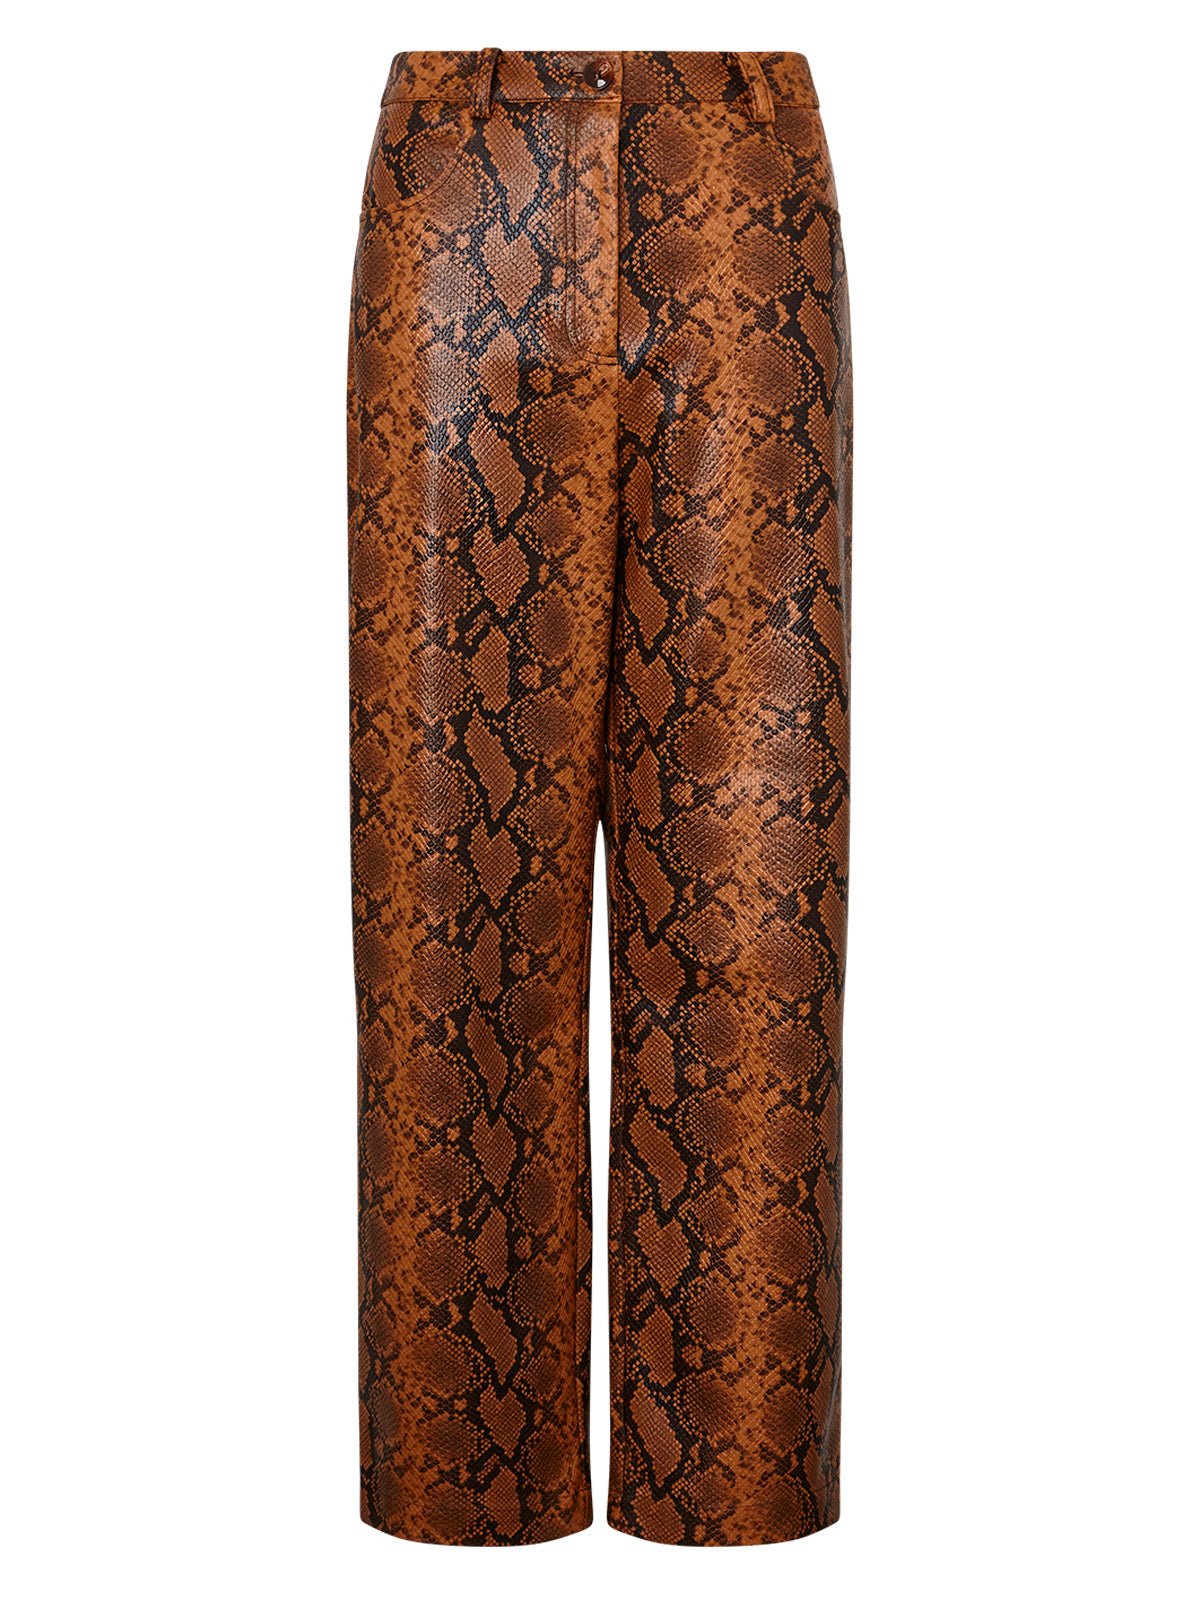 Women's Snake Faux Leather Straight Leg Trouser - Karlo | 4th & Reckless